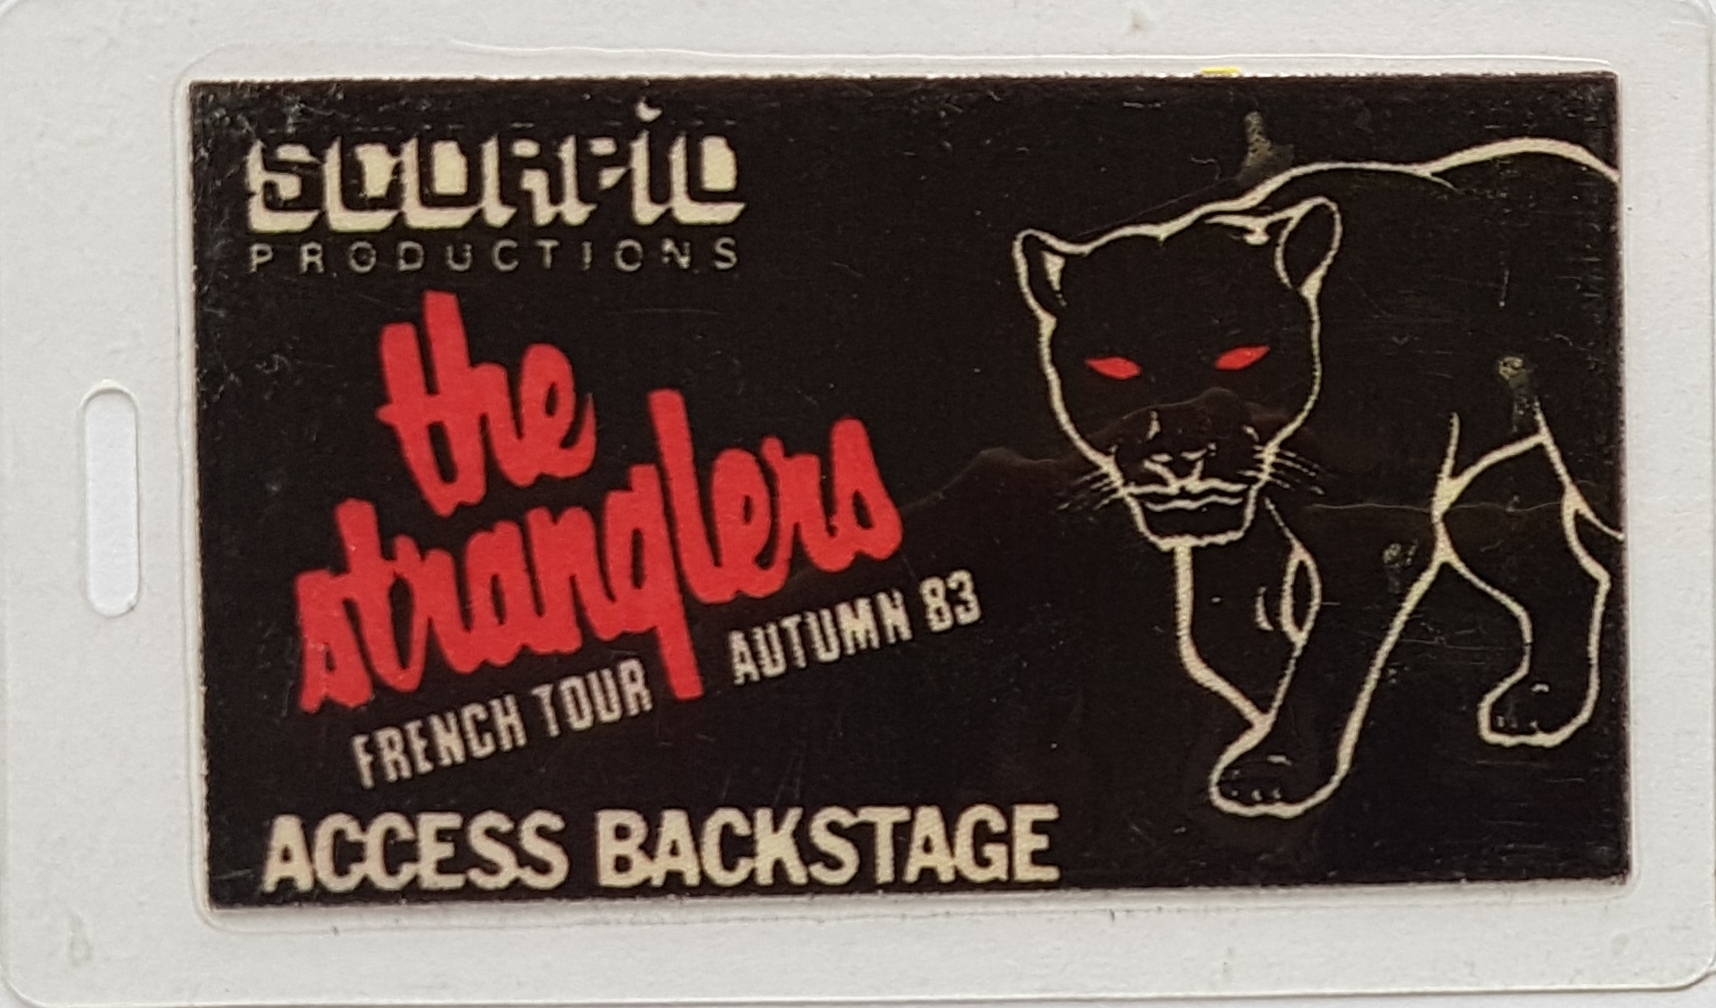 Picture of Back stage pass - French tour by artist The Stranglers from The Stranglers anything_else